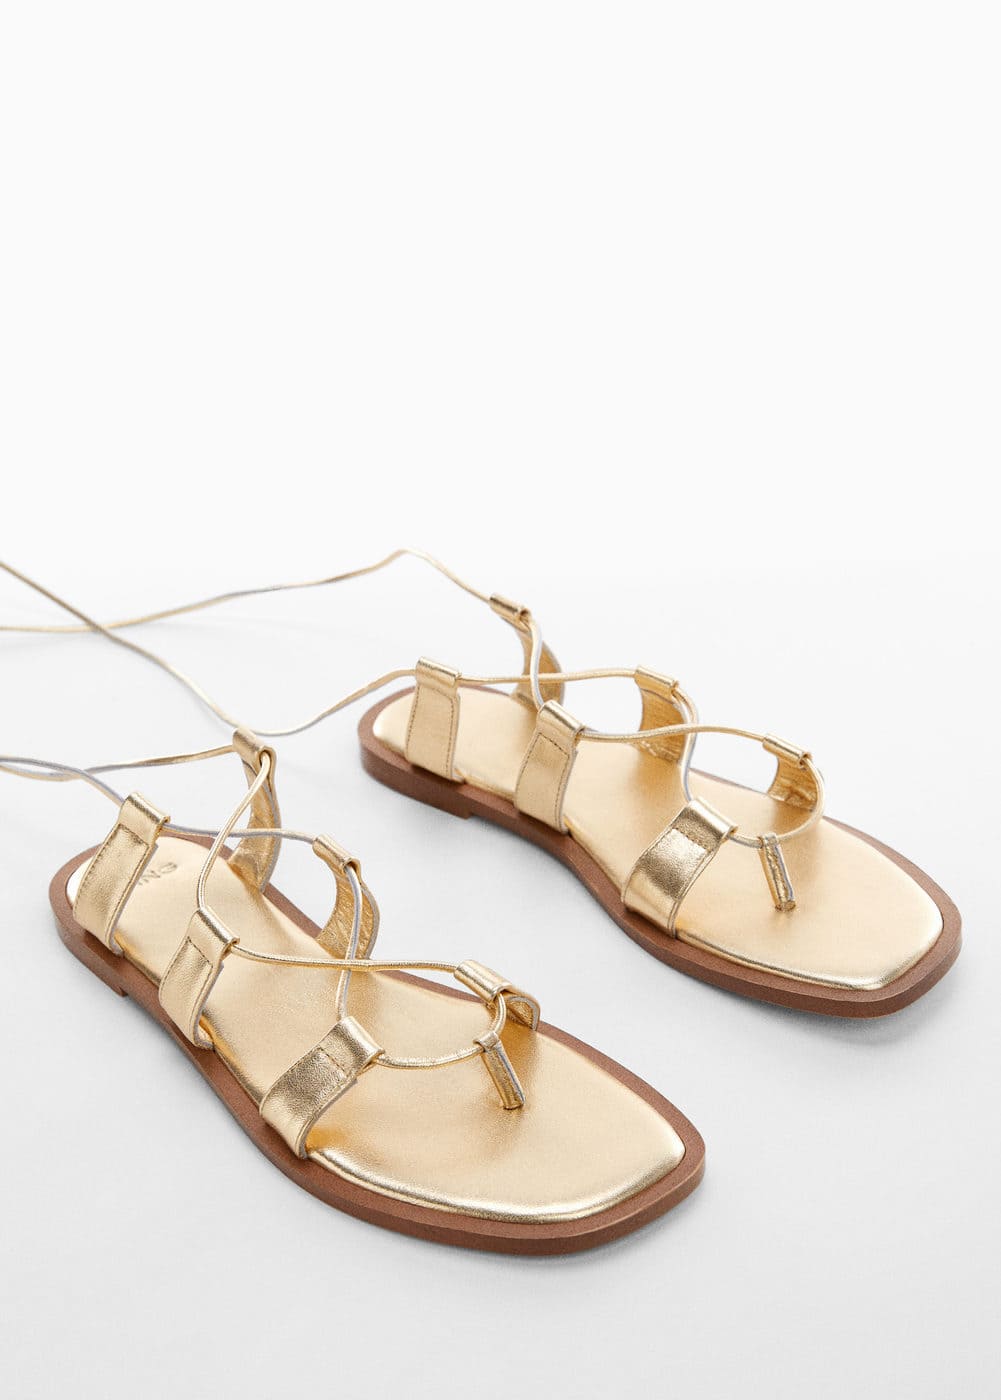 The Best High-Street Sandals From Zara, M&S and More | Who What Wear UK